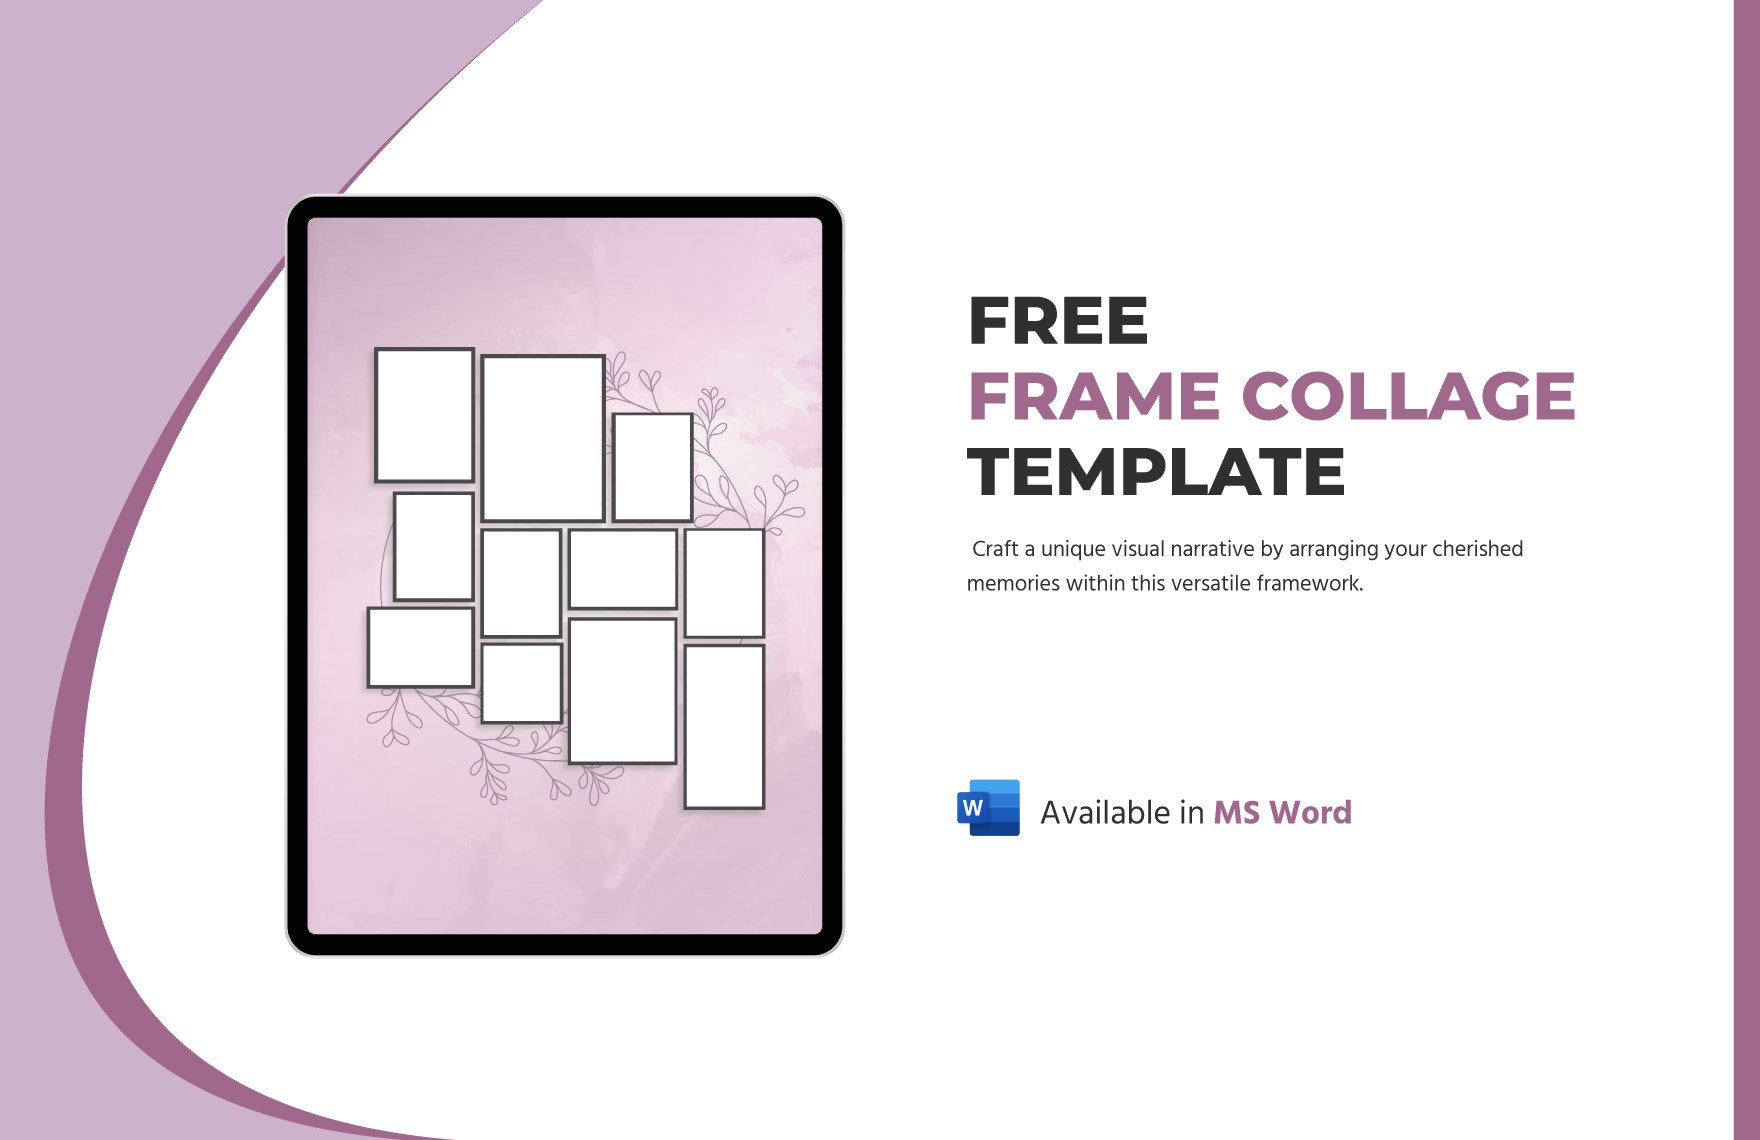 Free Frame Collage Template in Word